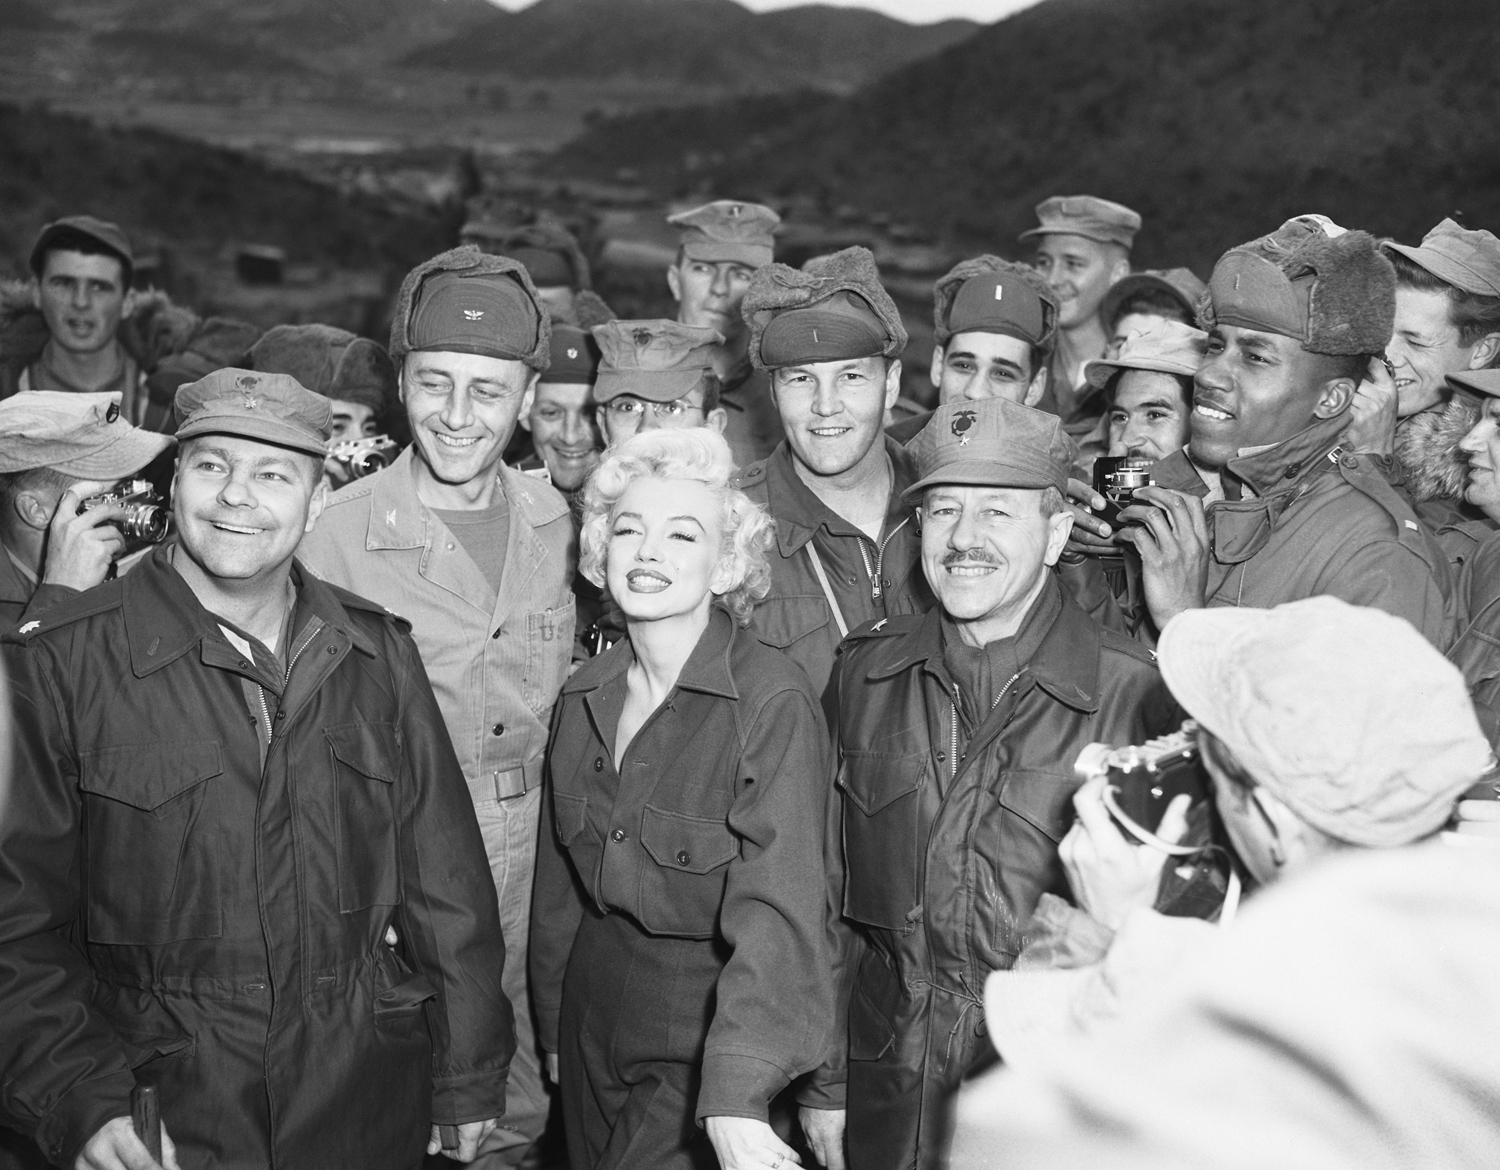 Marilyn Monroe with the Marines